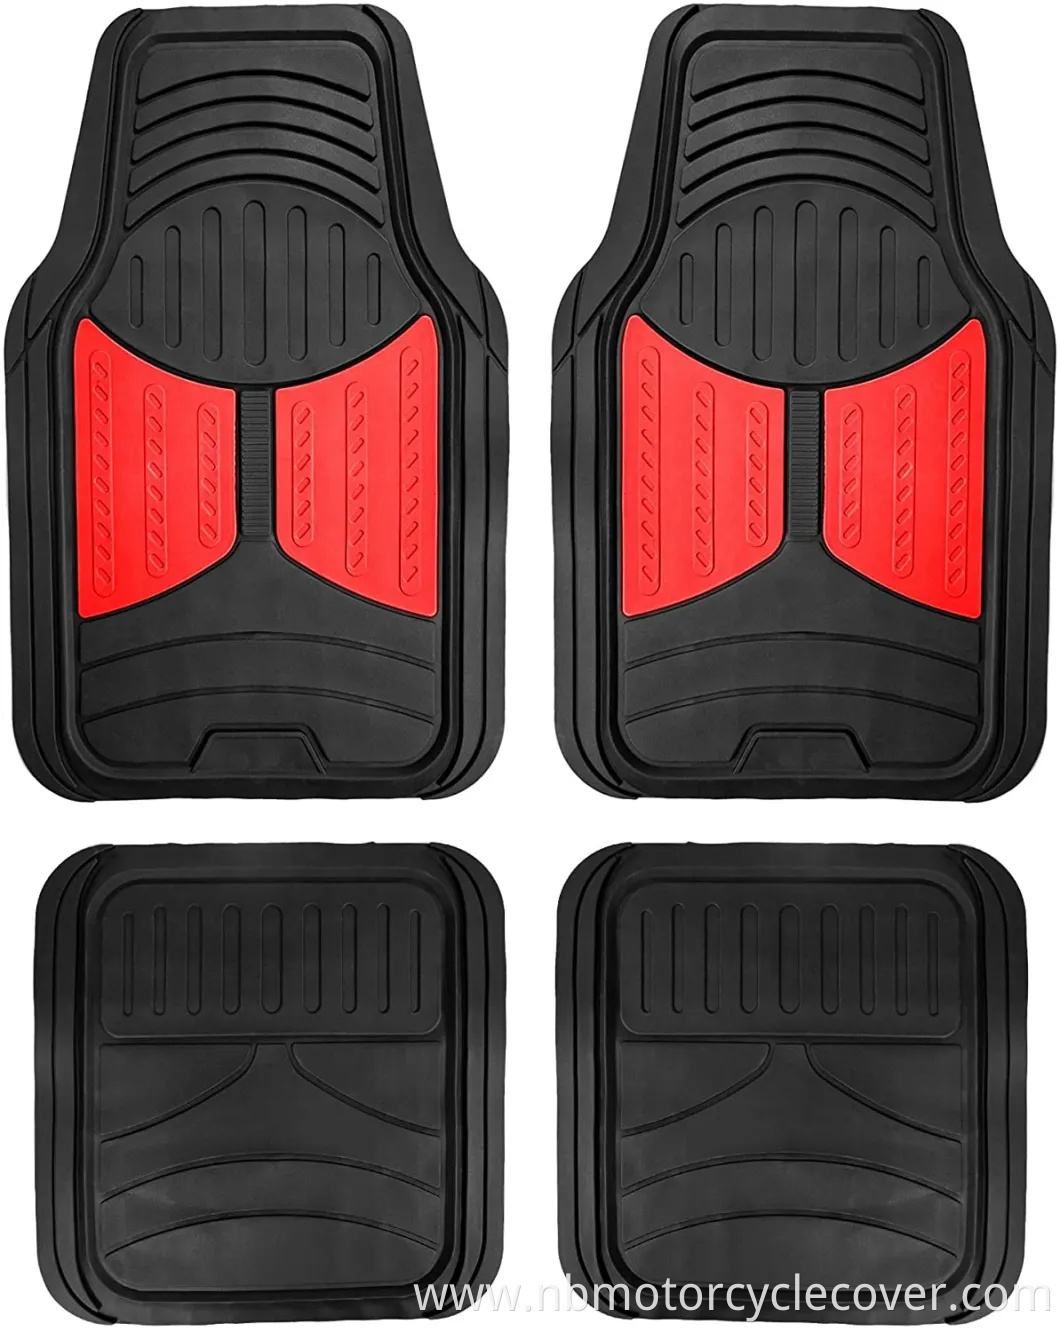 Trimmable Floor Mats (Red) Full Set - Universal Fit for Cars Trucks and Suvs